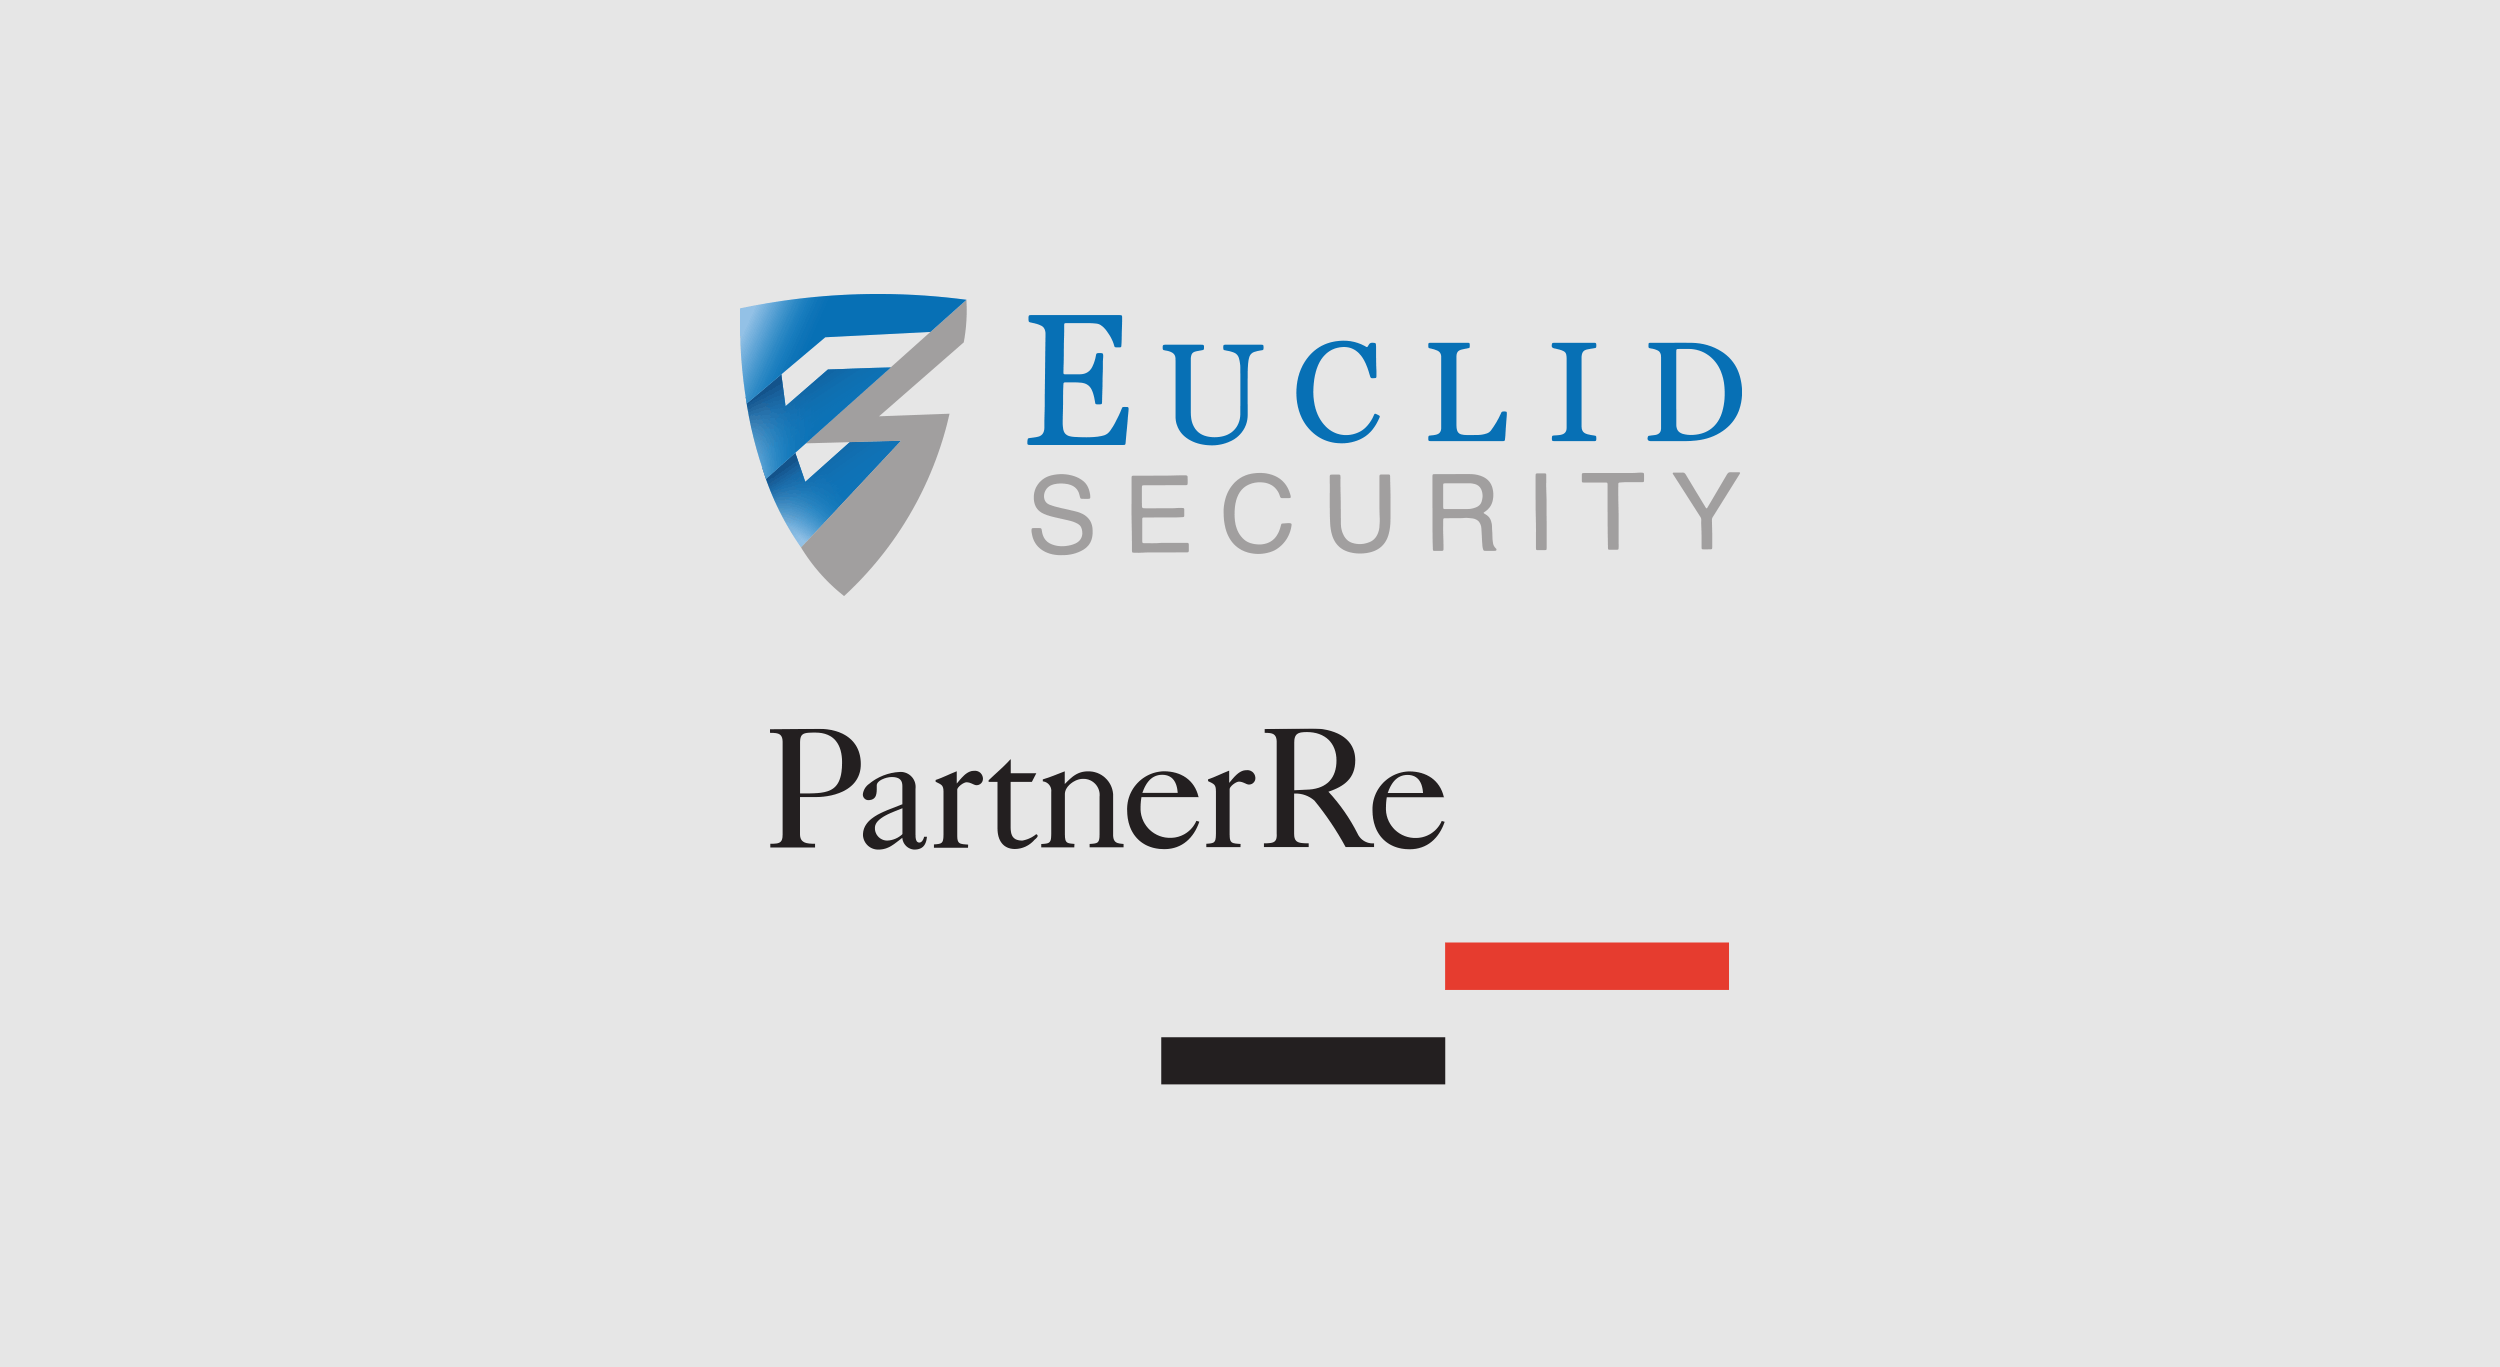 Euclid Security Programs LLC announces delegated authority partnership with the Insurance Programs unit of PartnerRe